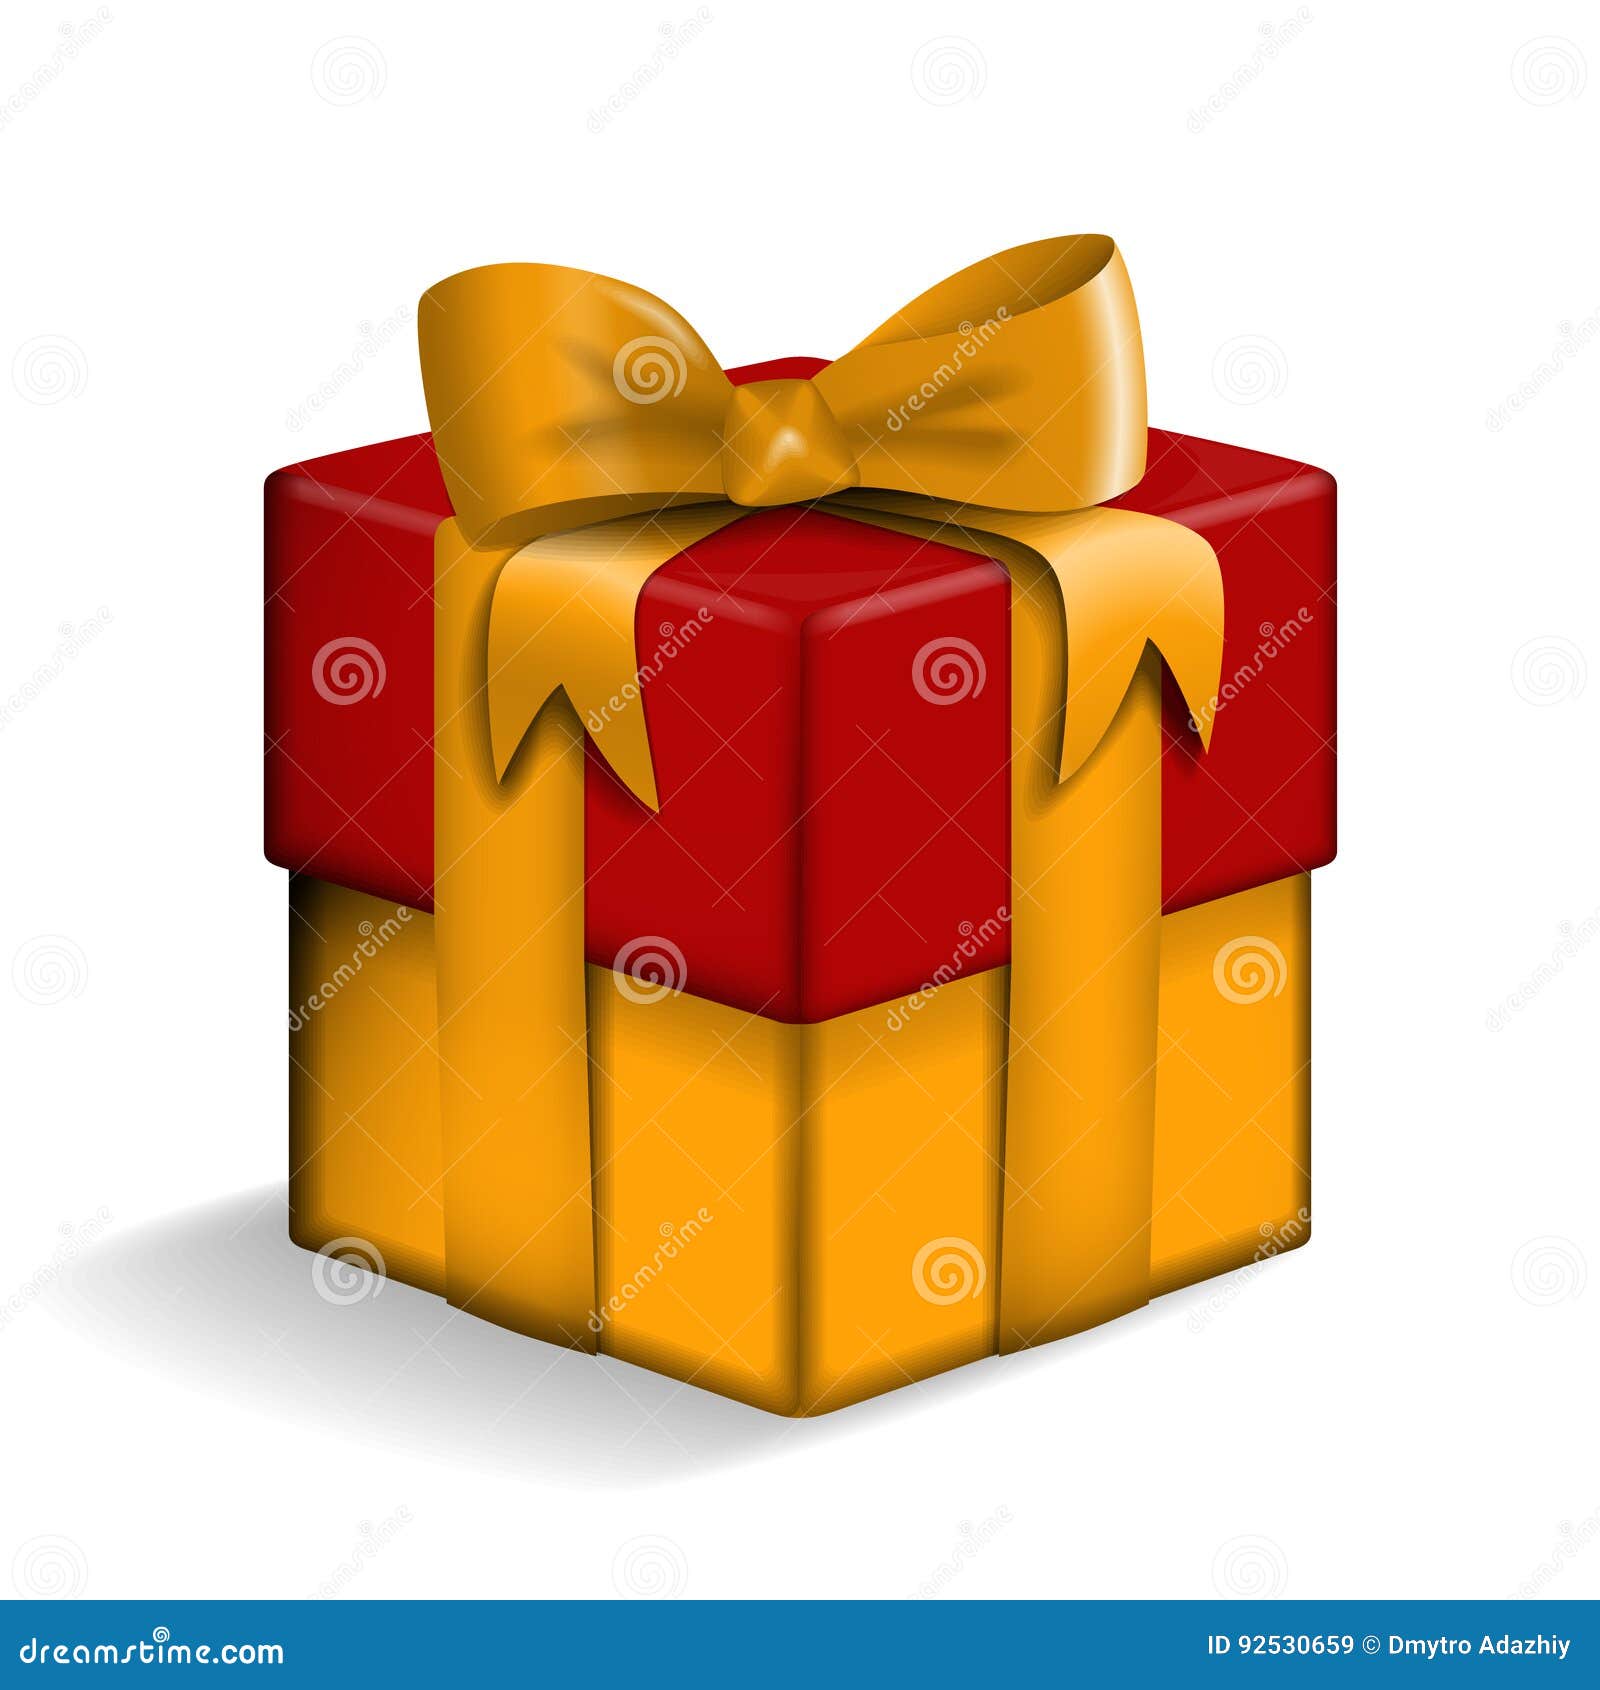 Yellow and red gift box. stock vector. Illustration of gift - 92530659